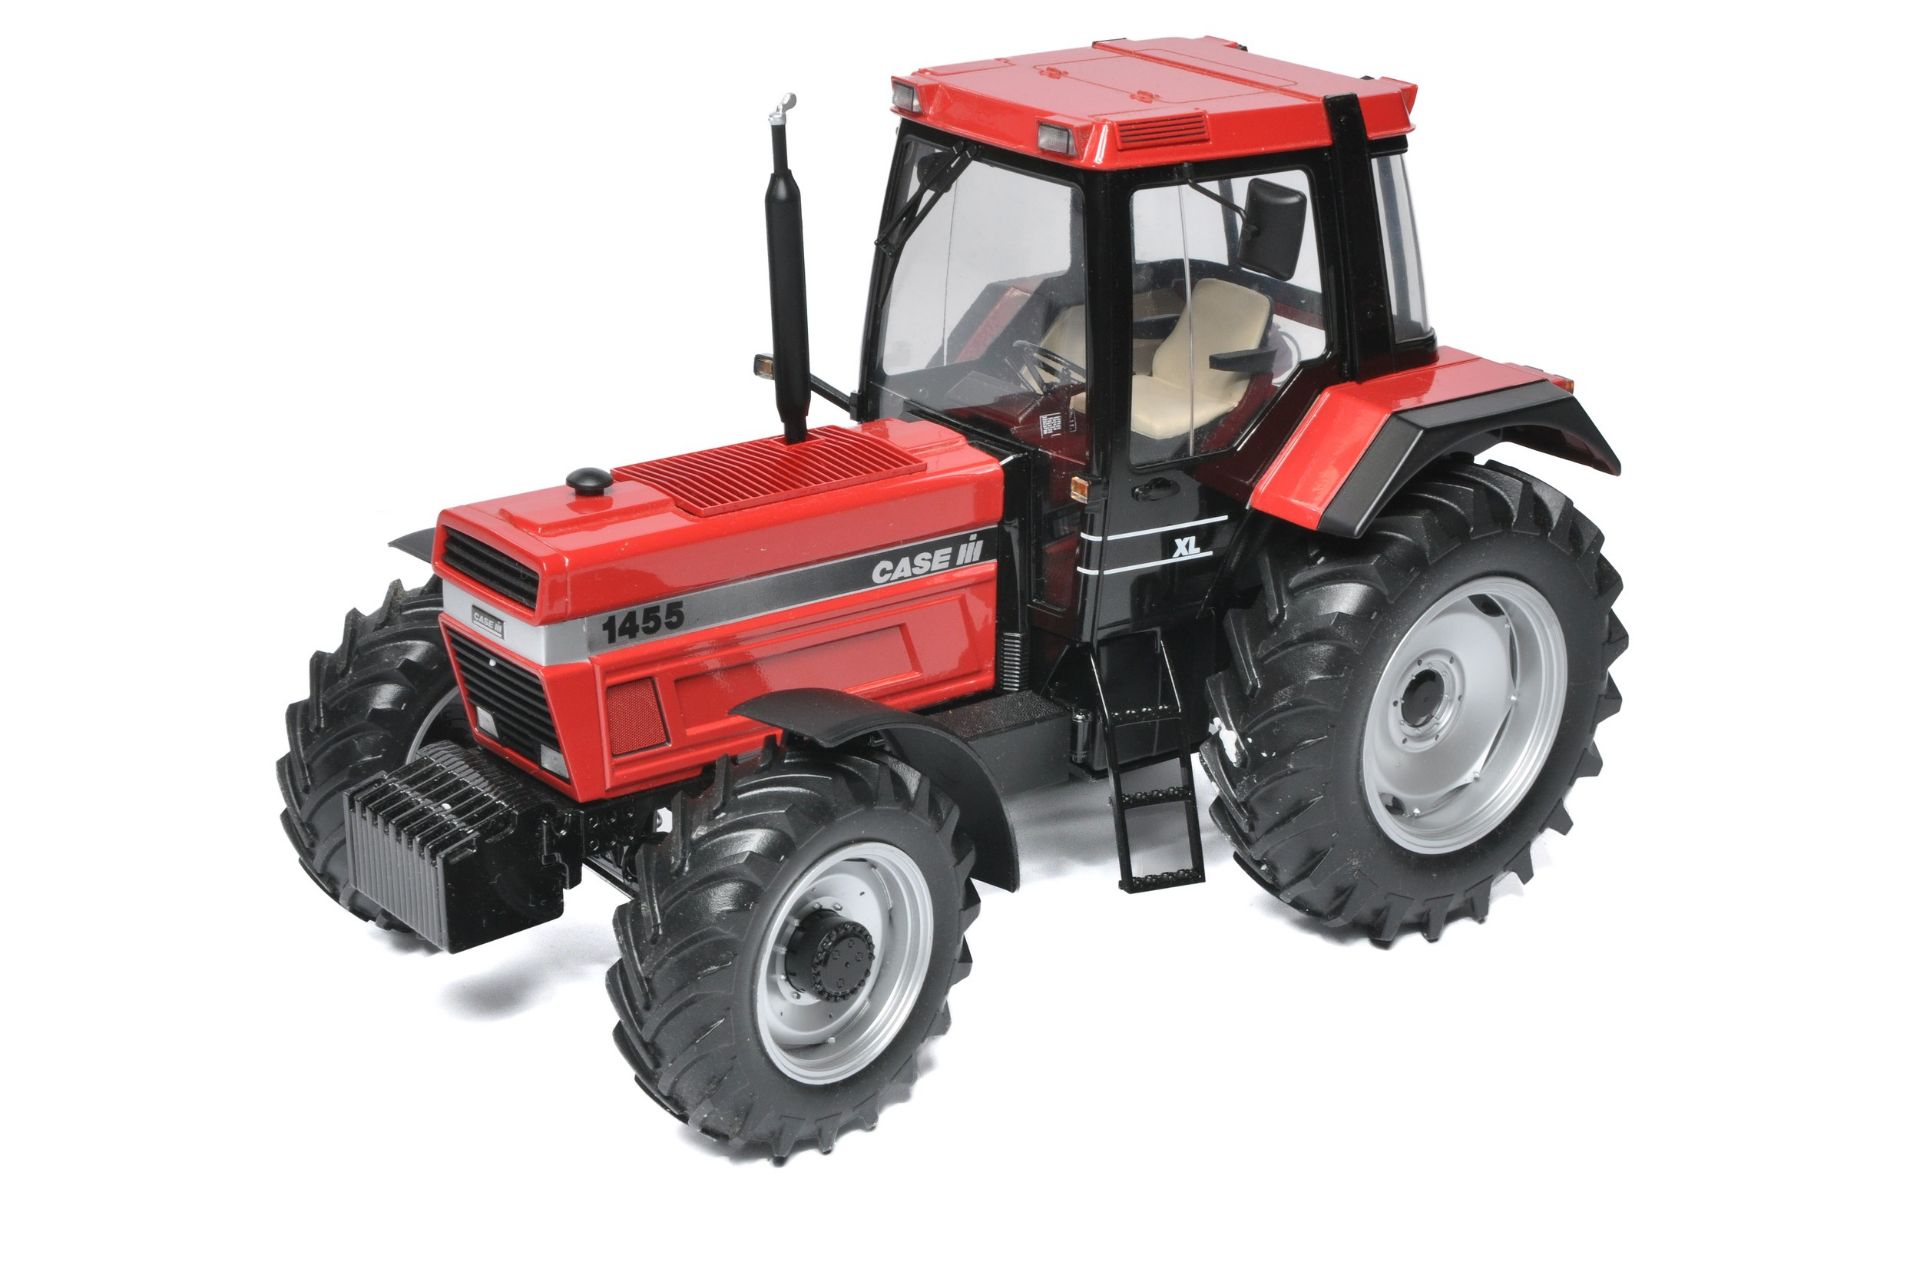 Universal Hobbies 1/16 diecast farm model issue comprising Case International 1455XL Tractor. - Image 2 of 4